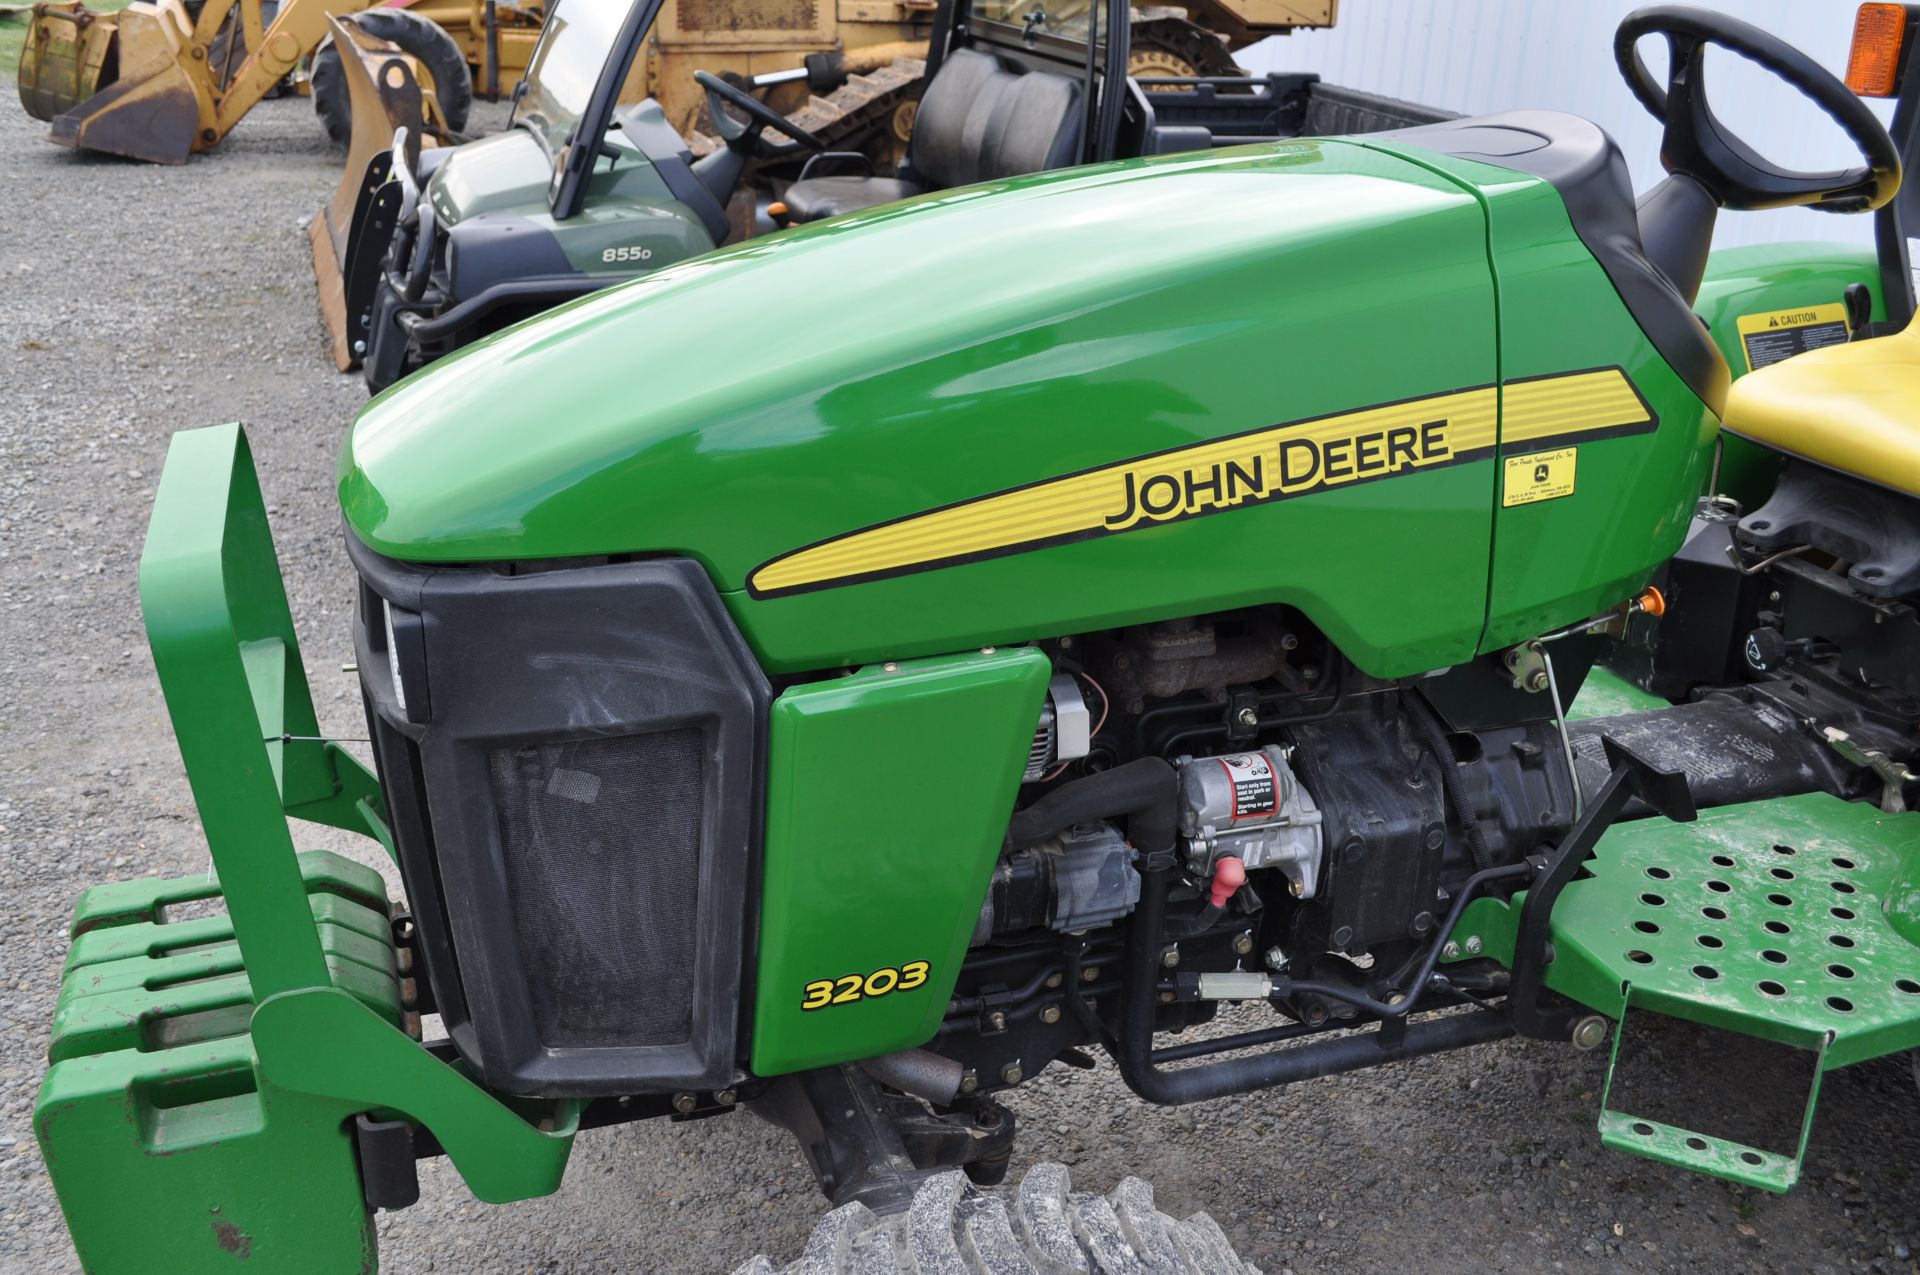 John Deere 3203 compact tractor, 15-19.5 rear, 25 x 8.50-14 front, 4x4 front wts, mid mast hyd - Image 14 of 26